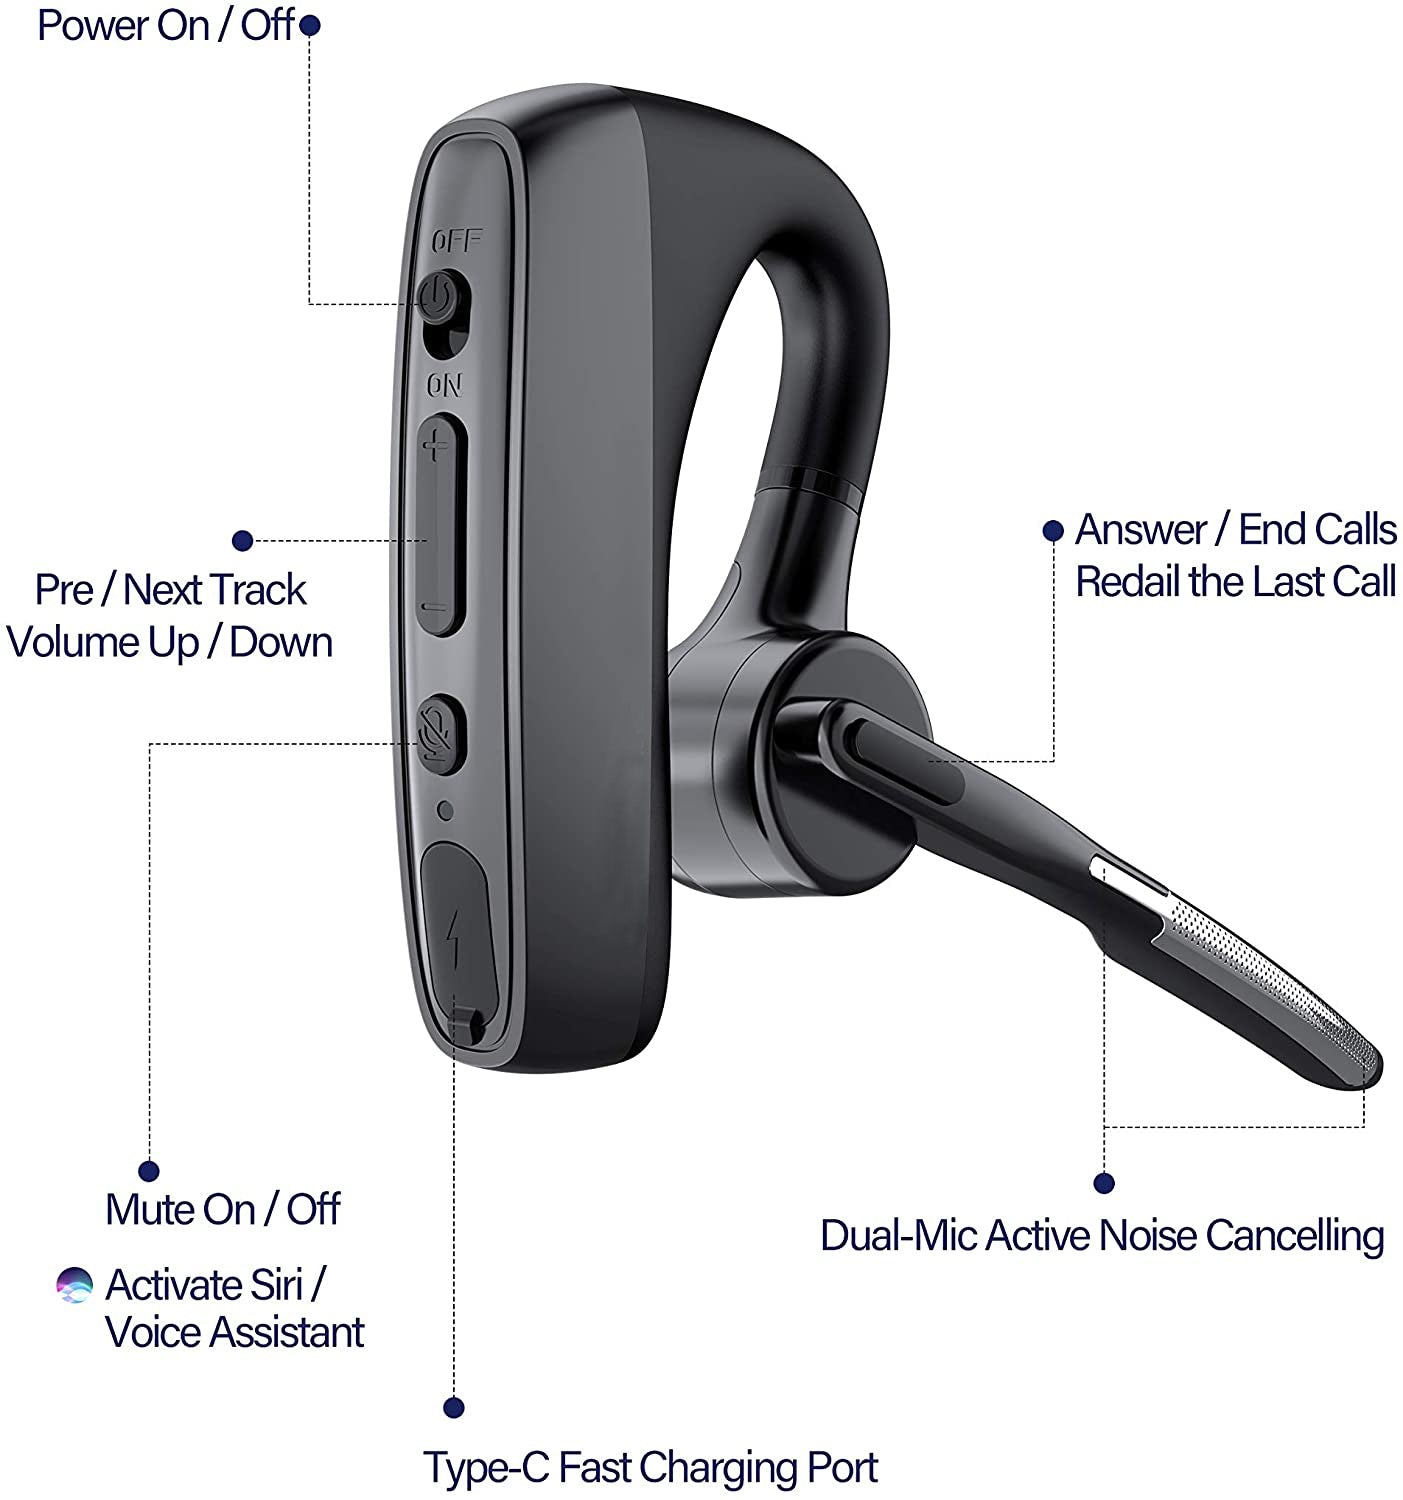 Bluetooth Earpiece for use with apple and android smart phones. Also compatible with two way radios 